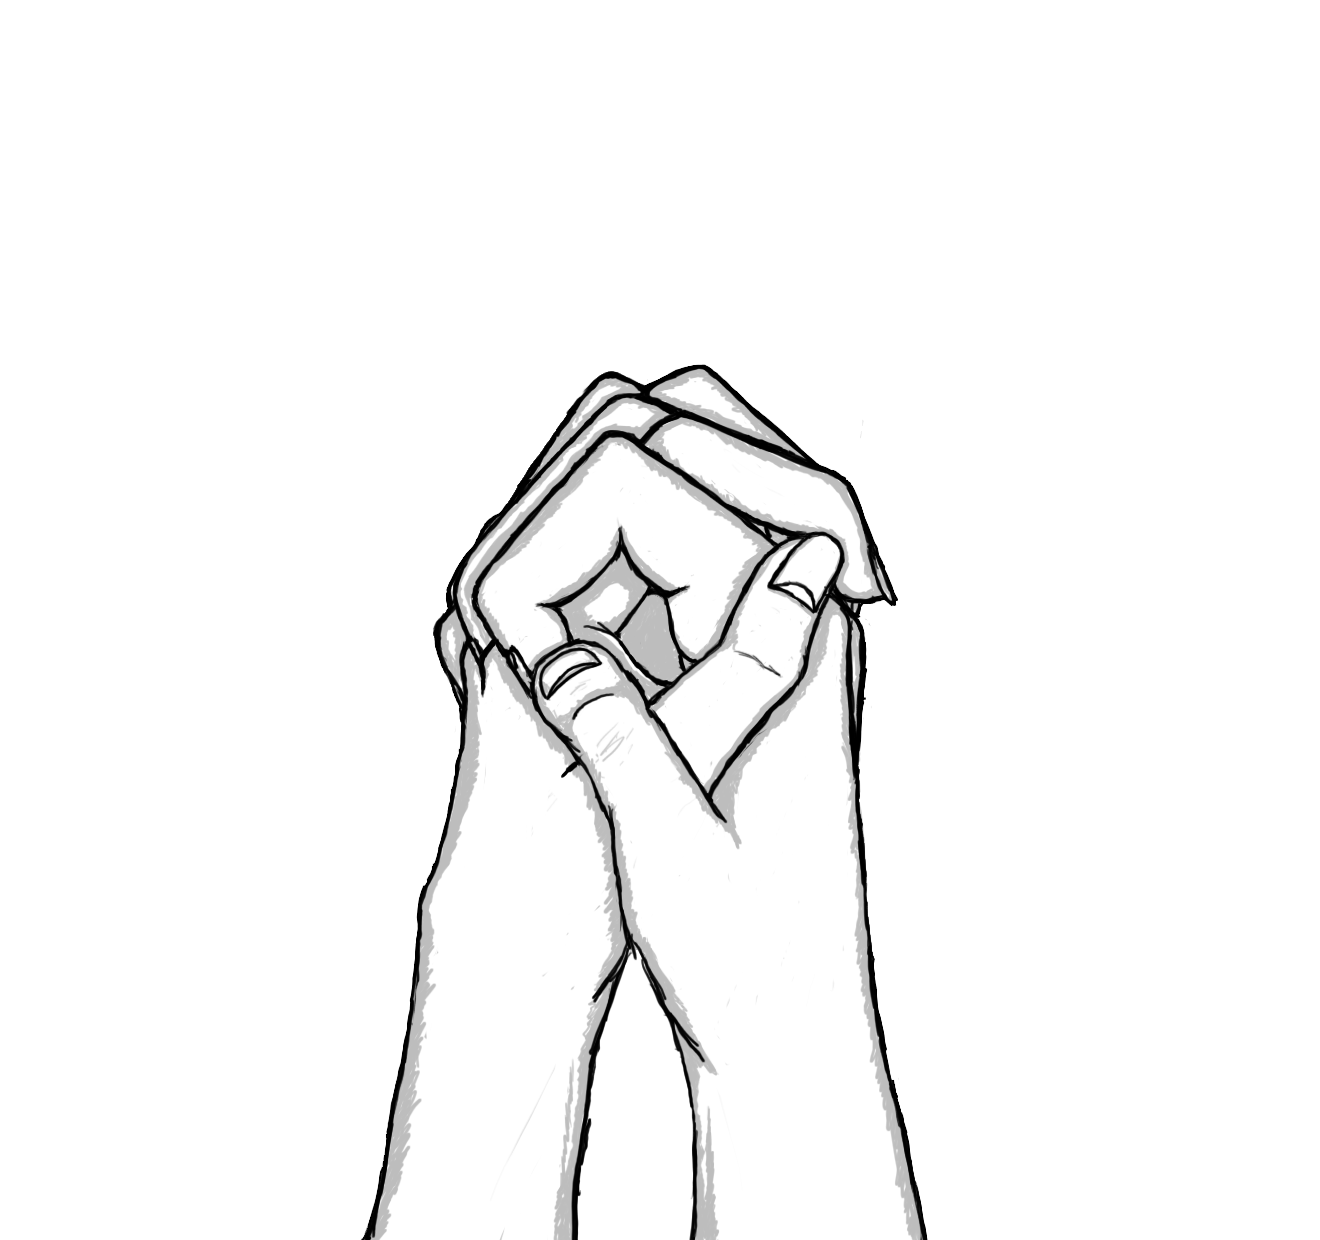 Drawing Of People Holding Hands - Cliparts.co